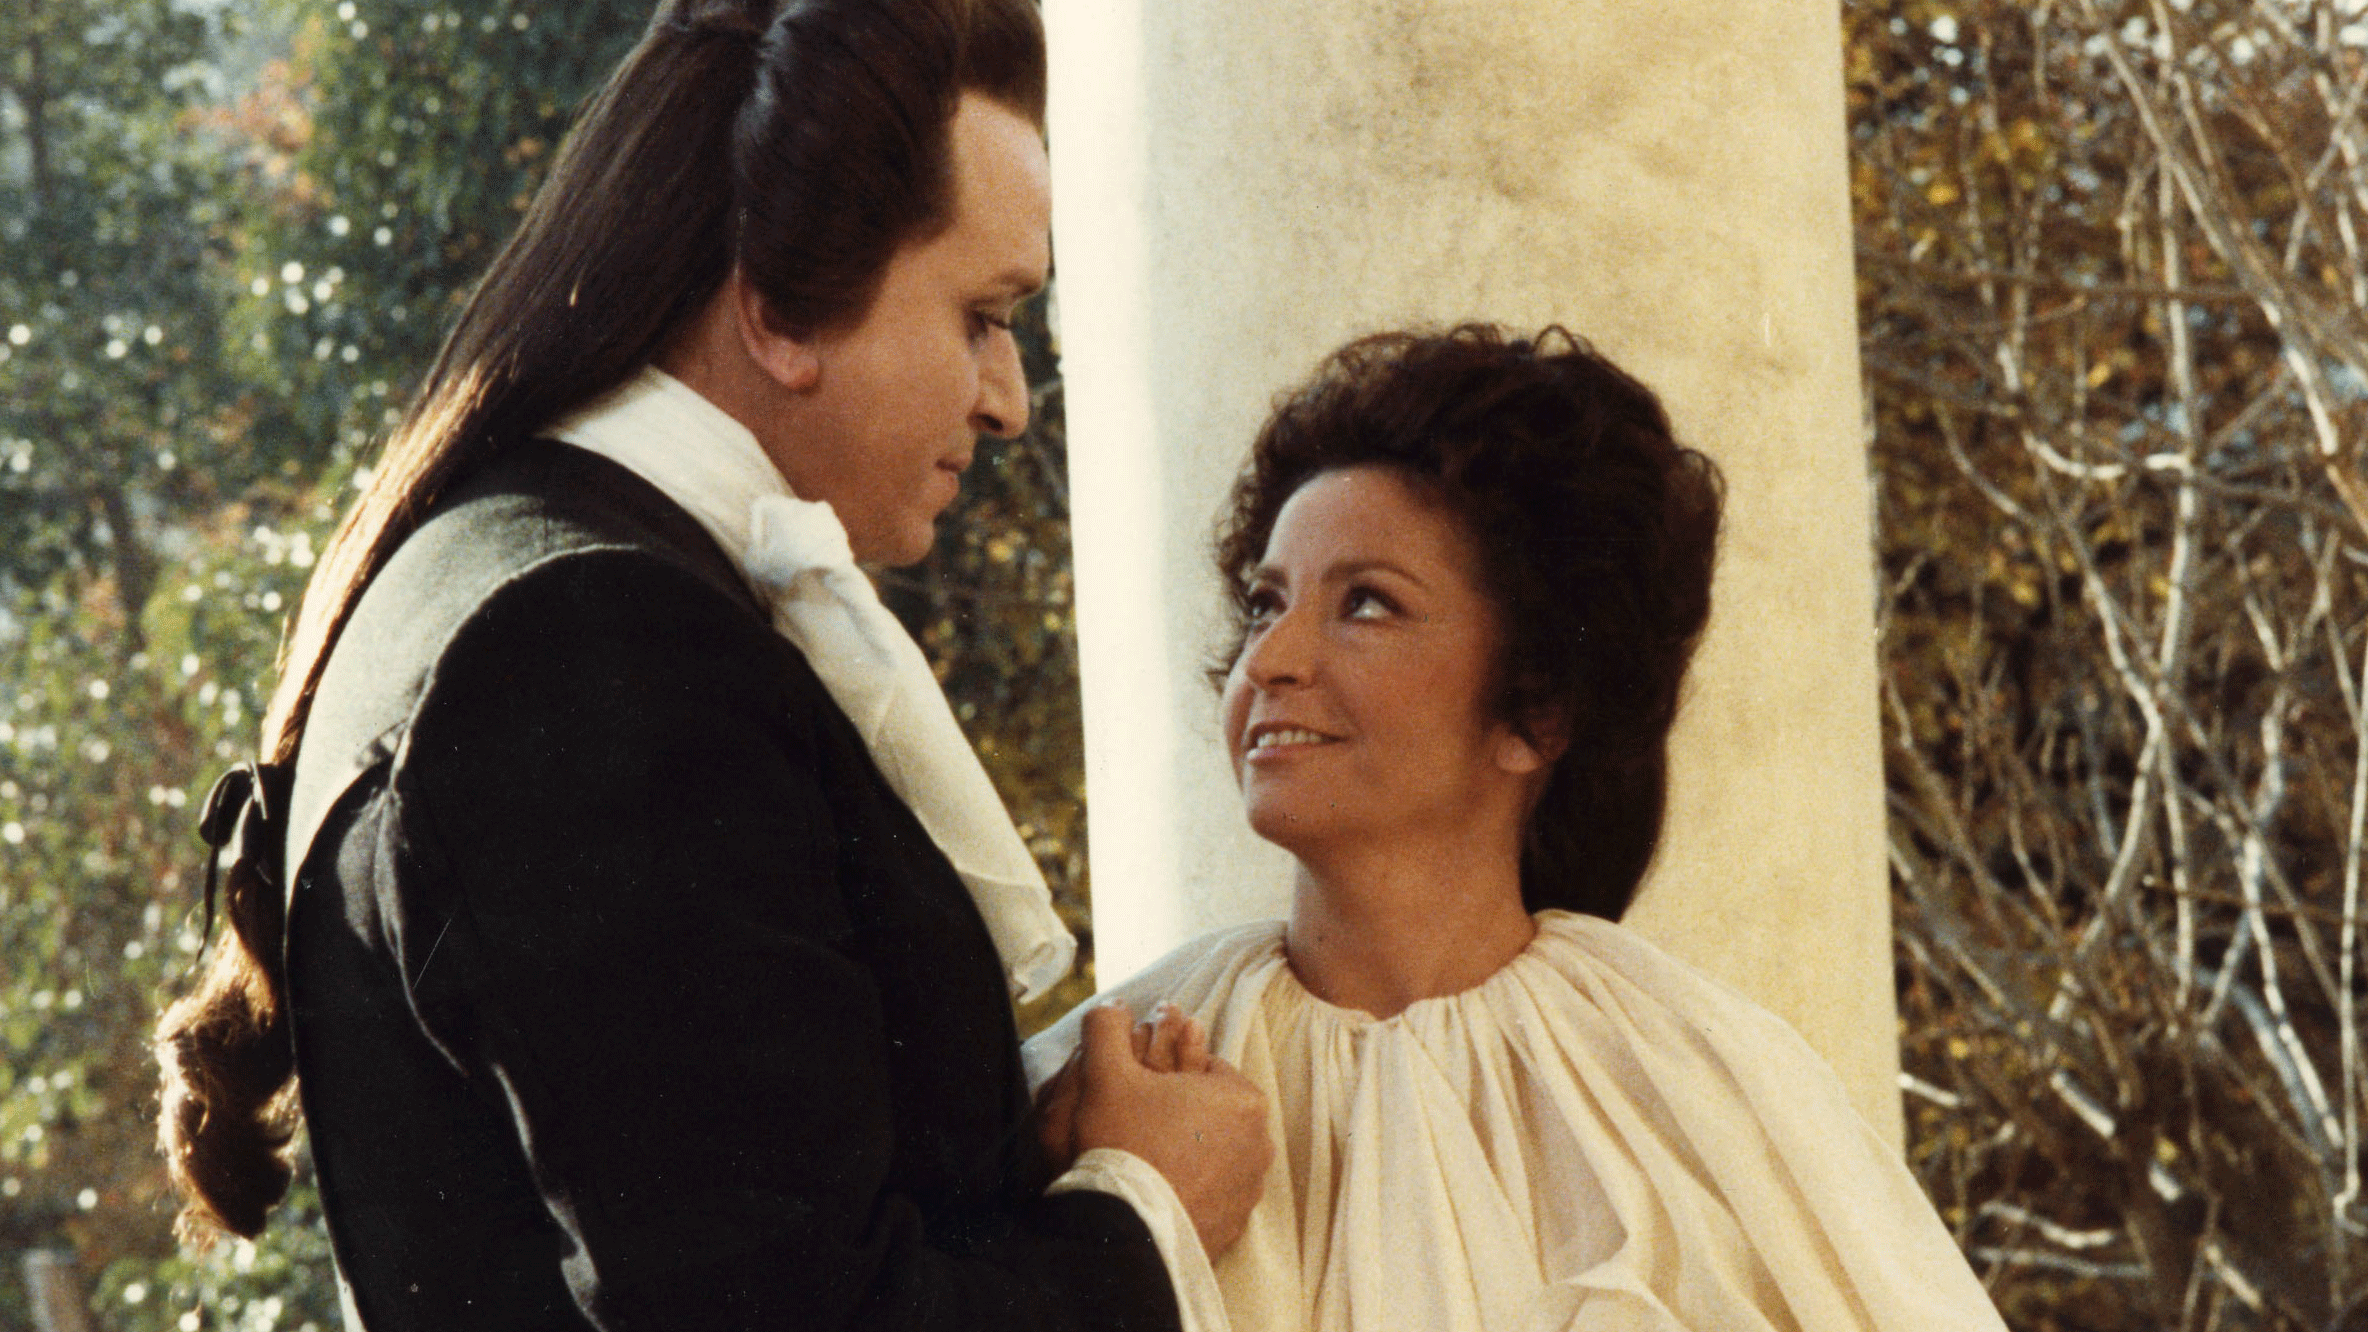 Don Giovanni, a film by Joseph Losey after Mozart's opera